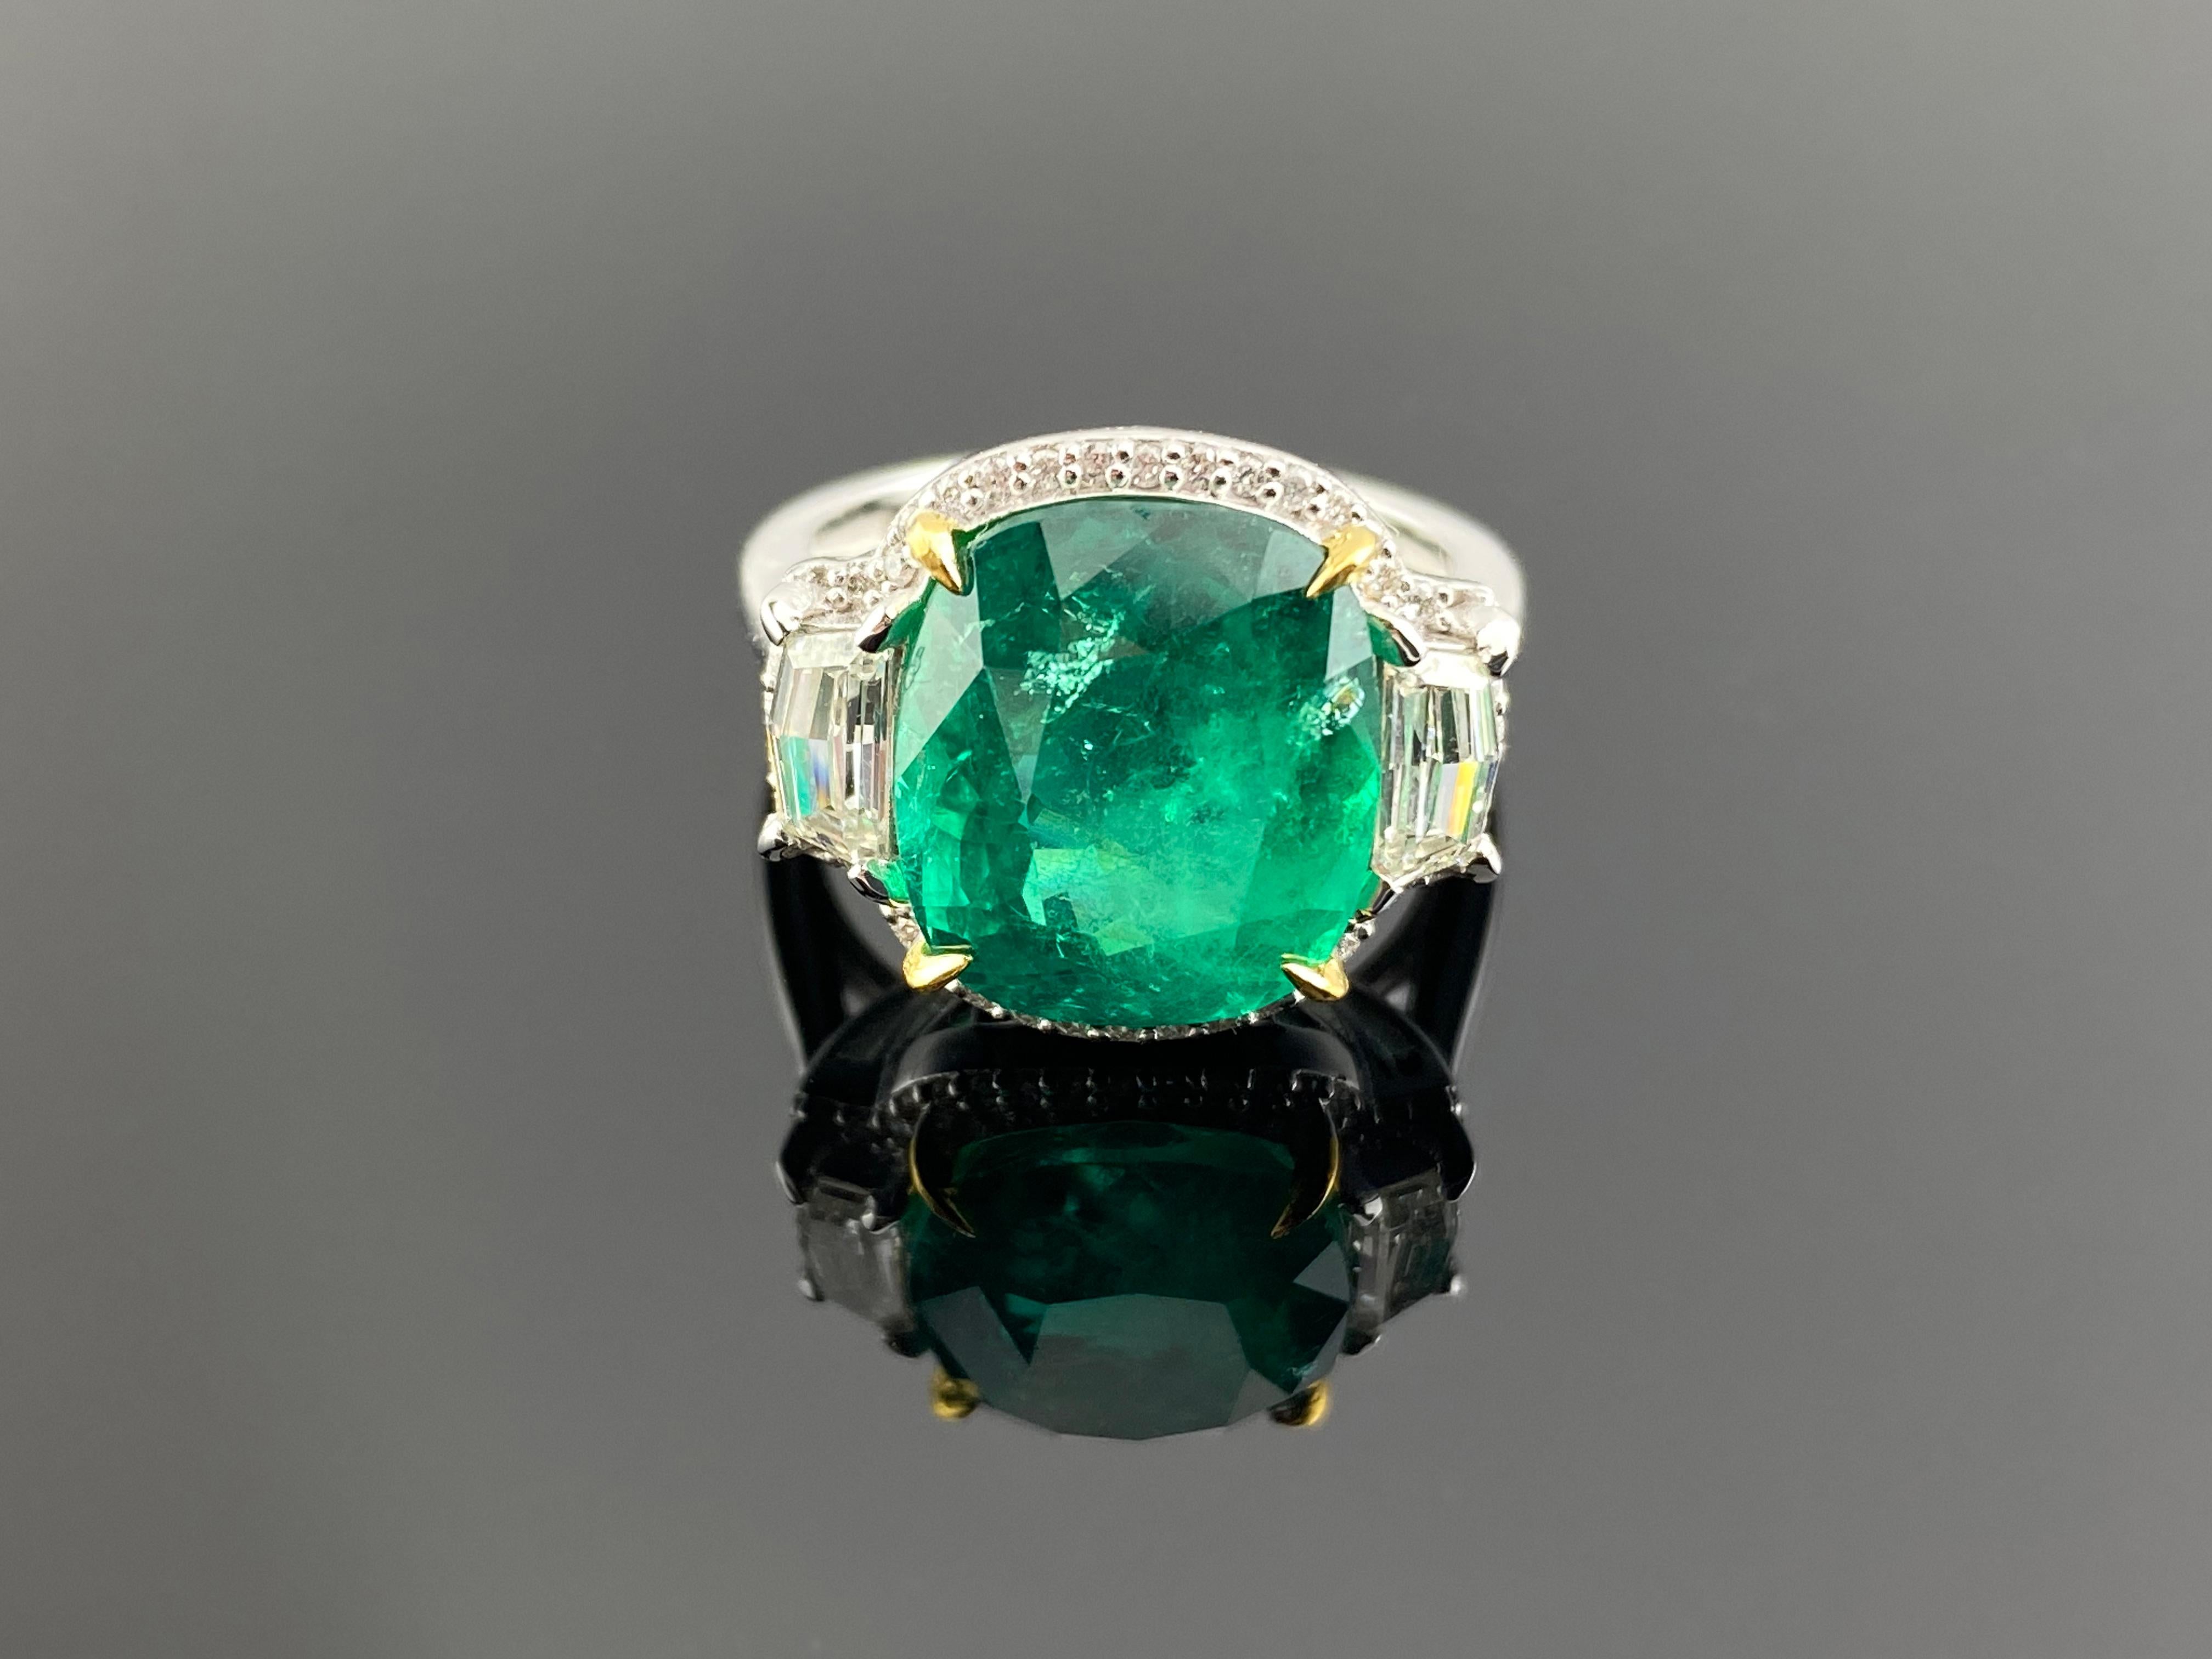 A stunning ring featuring a 7.32 Carat Natural Colombian, Vivid Green Cushion Cut Emerald , 2 G - VS Cadilac shaped diamonds weighing a total of 0.60, along with 0.18 Carats of Diamond Accents set in 6.59 Gms 18K Gold. People have admired emerald’s